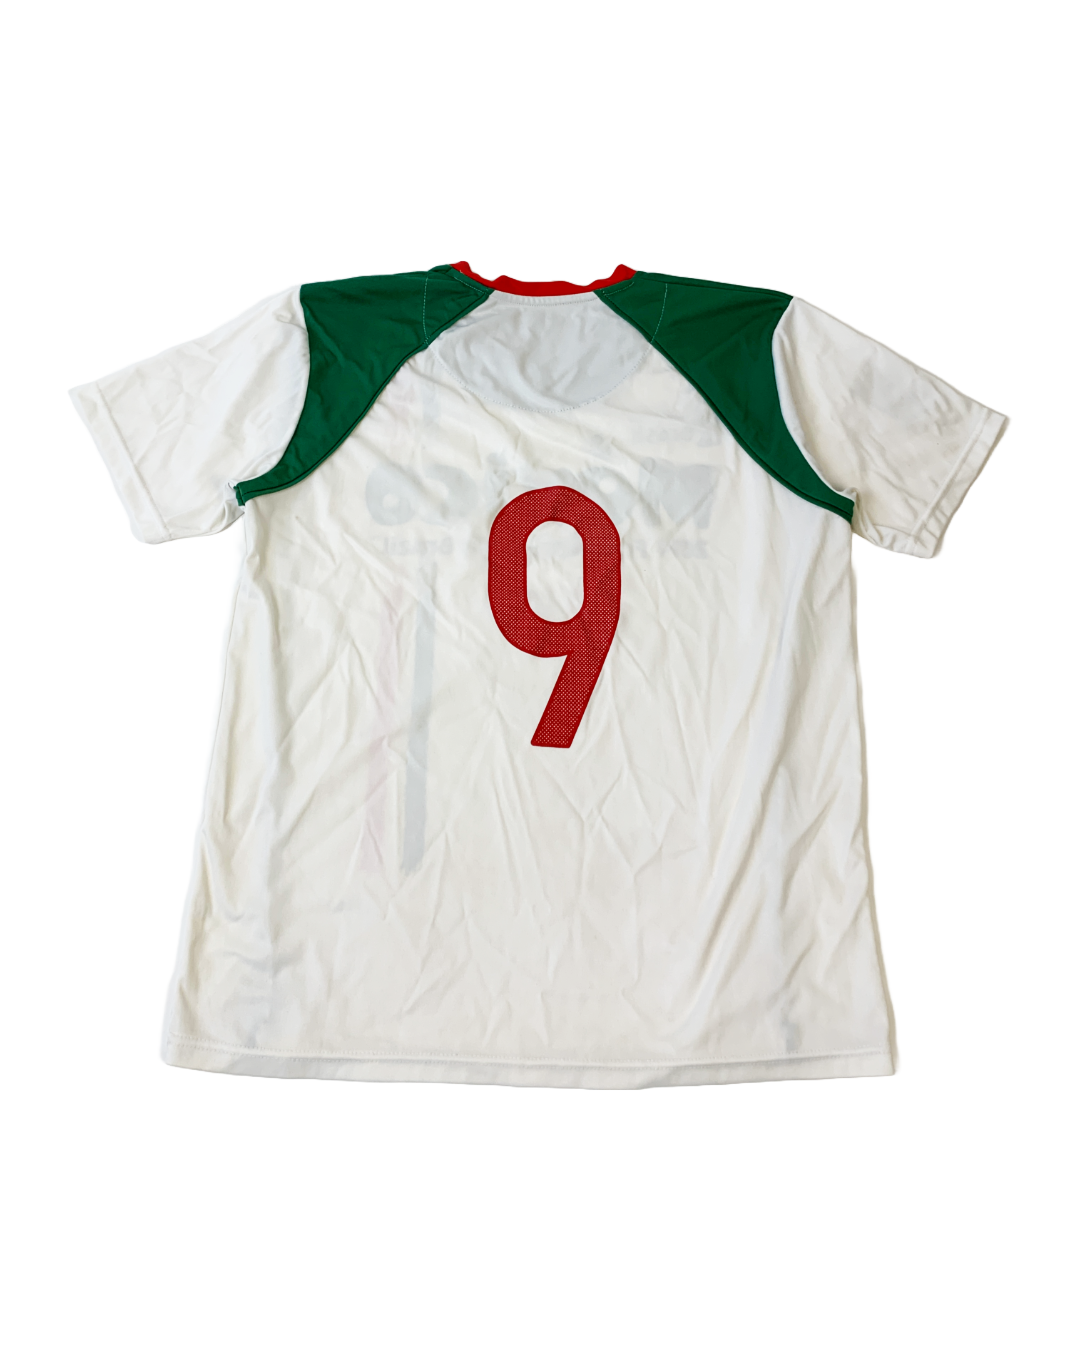 2014 Mexico Brazil World Cup Jersey - L